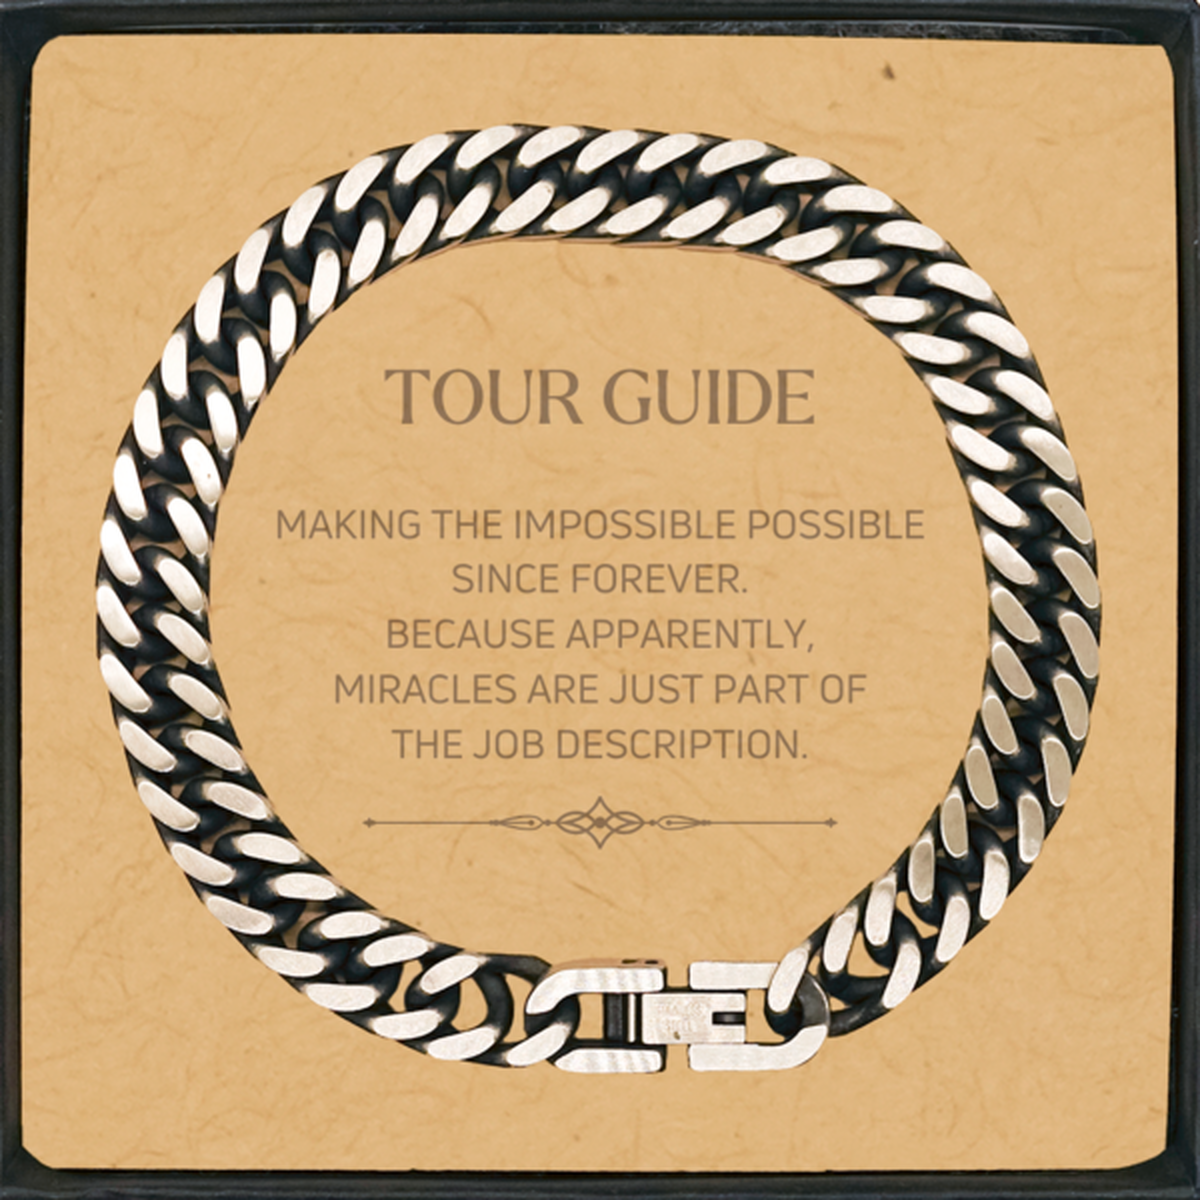 Funny Tour Guide Gifts, Miracles are just part of the job description, Inspirational Birthday Cuban Link Chain Bracelet For Tour Guide, Men, Women, Coworkers, Friends, Boss